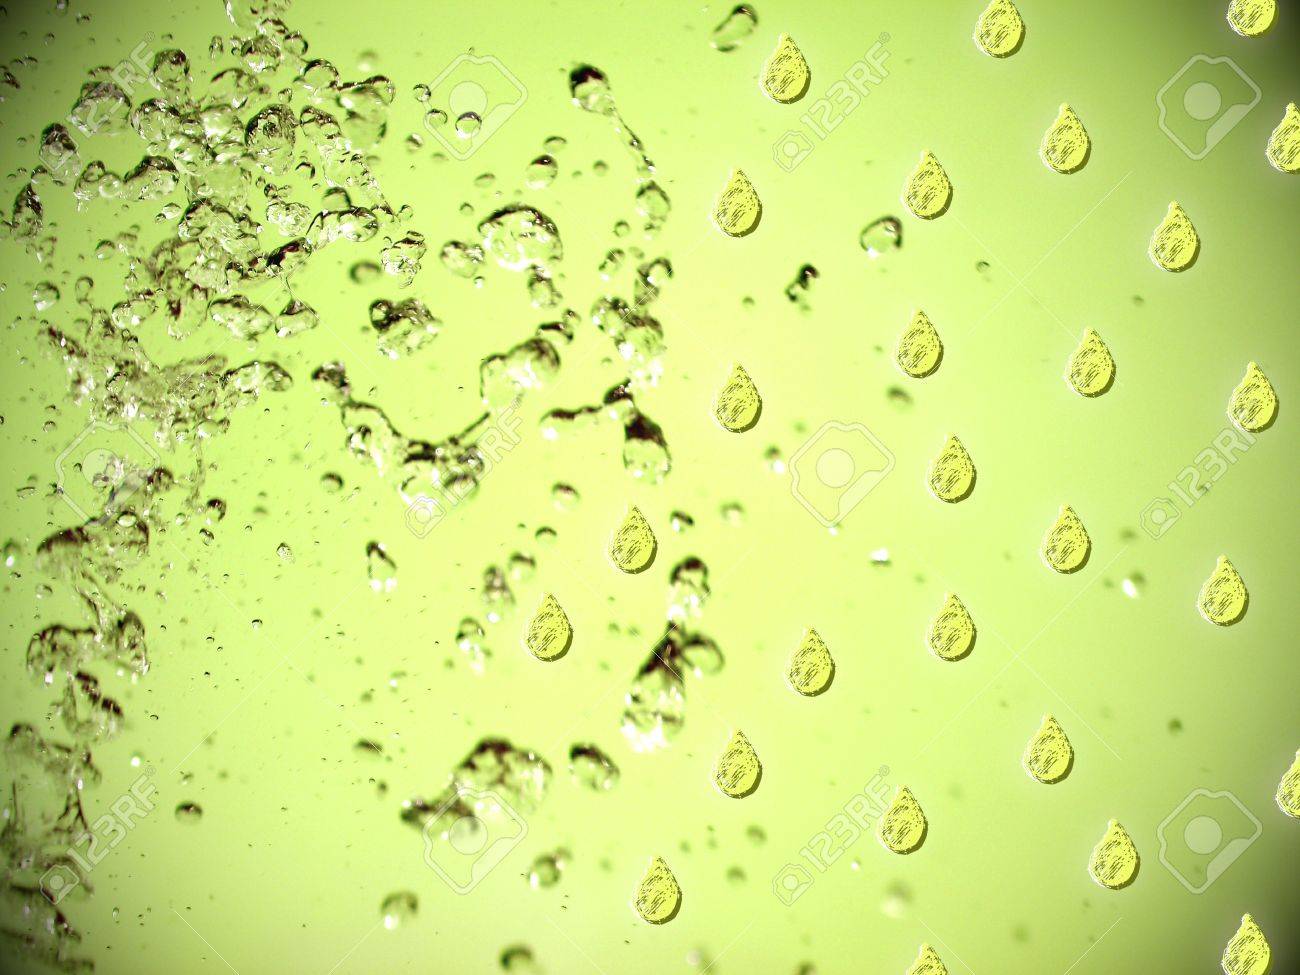 Pale Light Green Soda Drops Photography And Illustration In